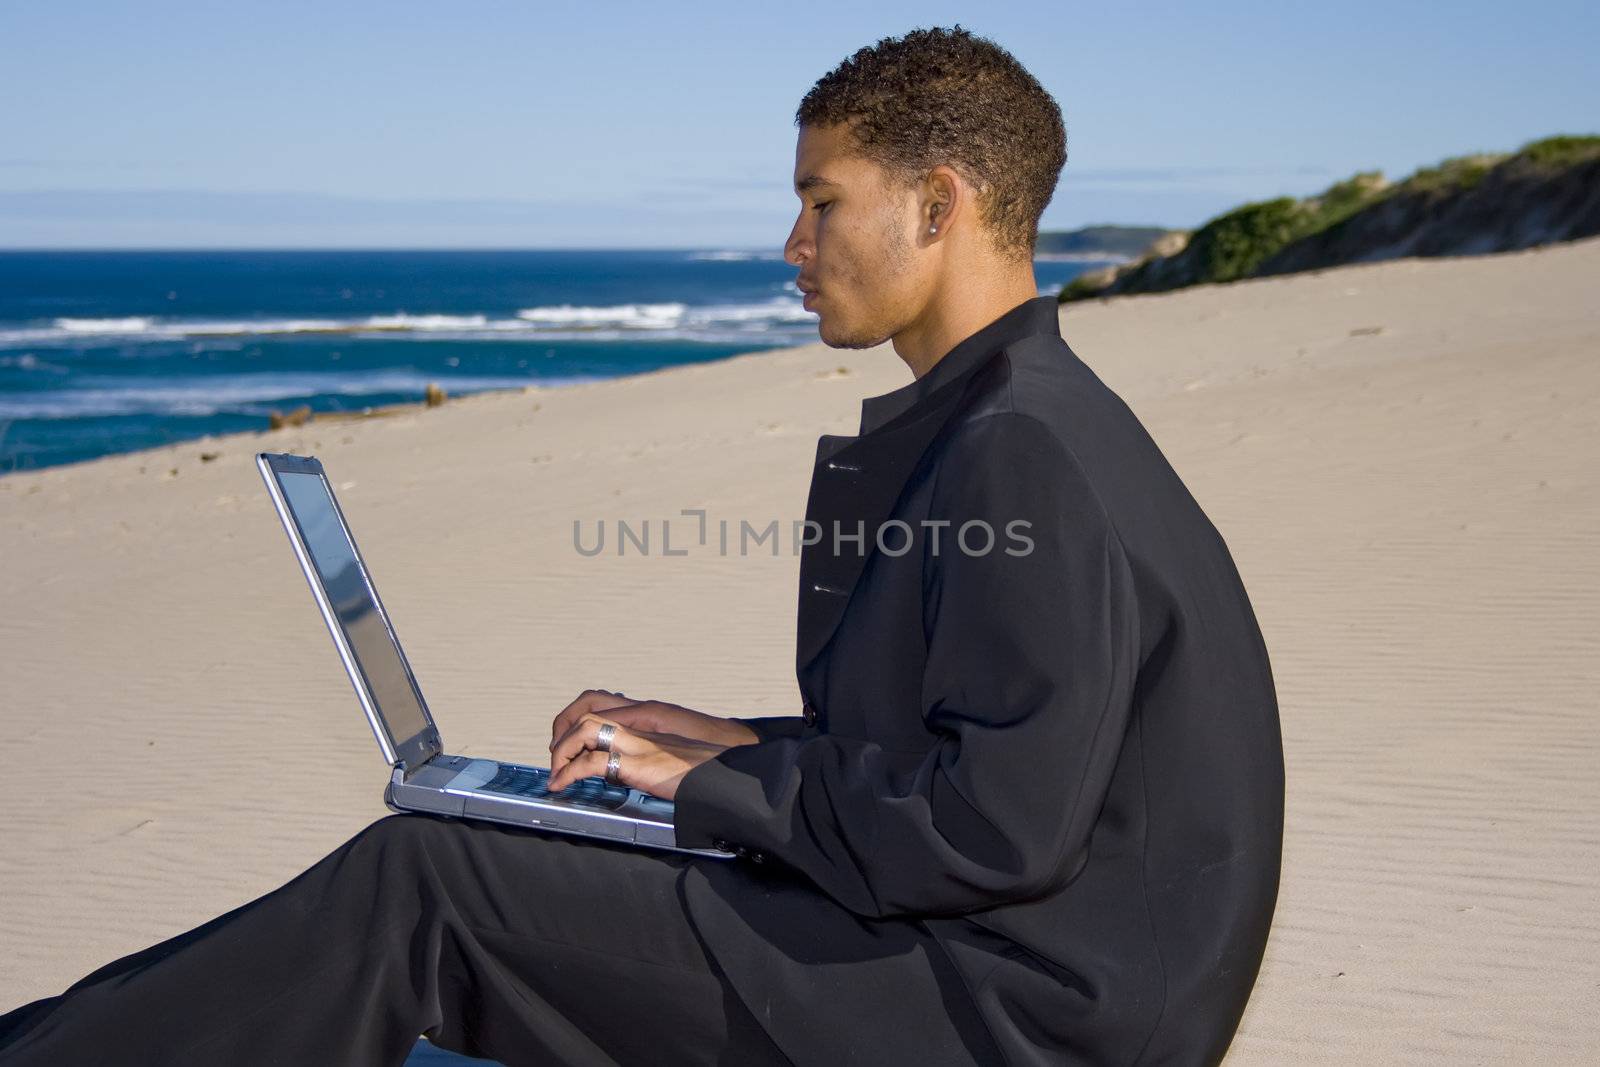 Young professional working on a laptop at the beach